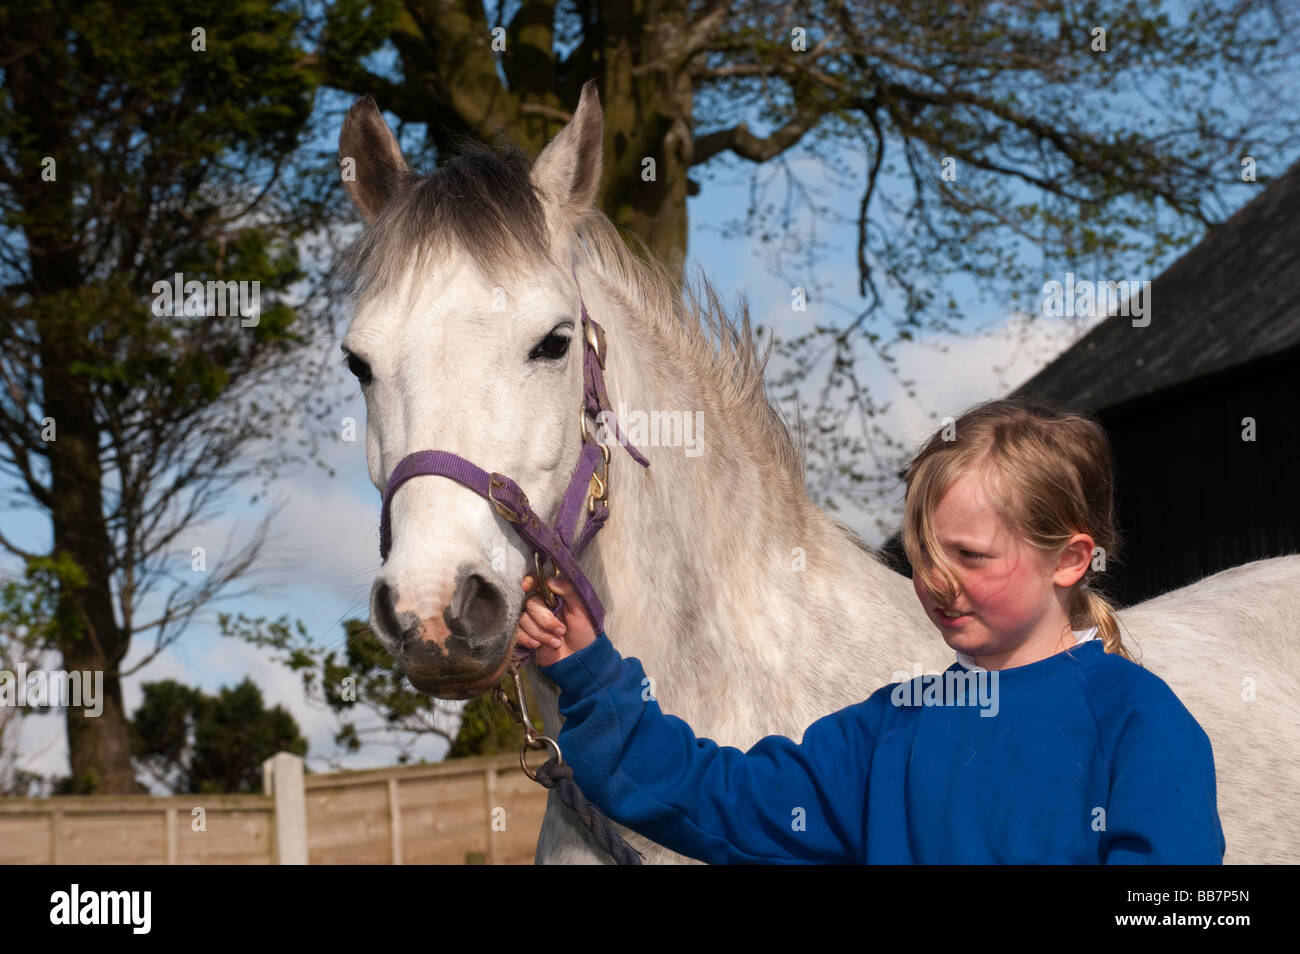 Blonde girl holding a white pony in paddock Cumbria Stock Photo